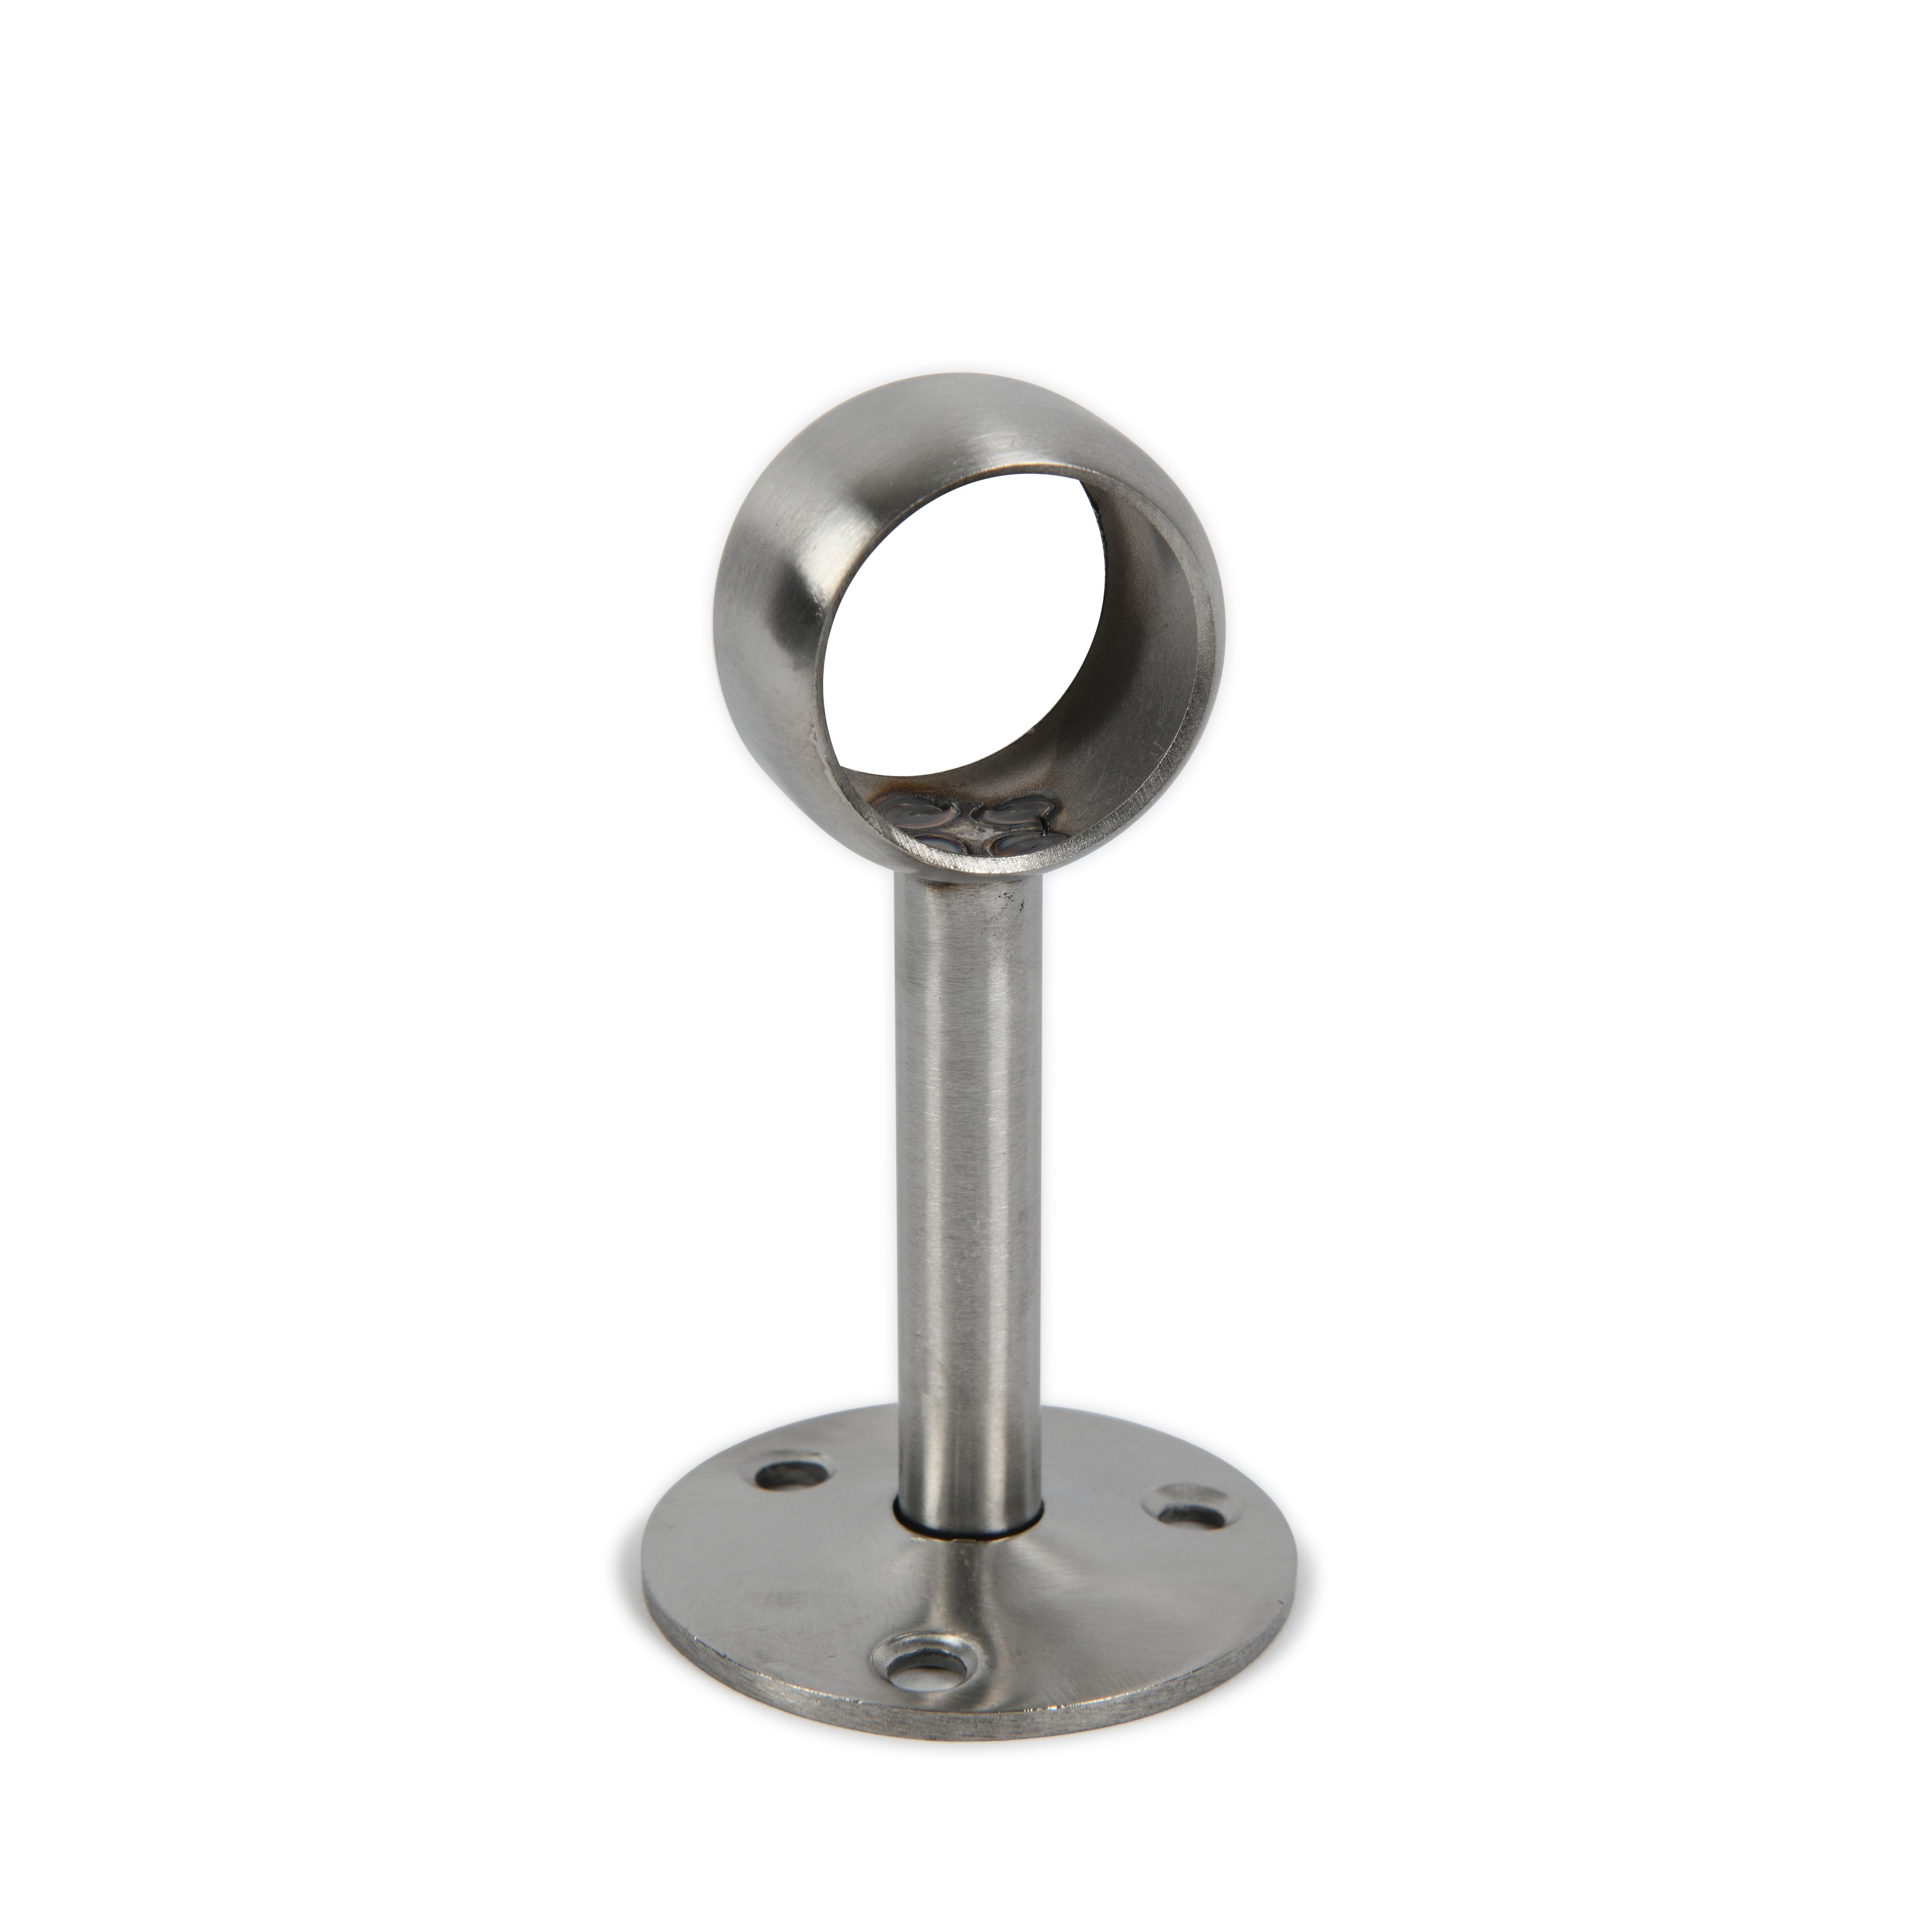 Colorail Brushed Nickel effect Stainless steel Rail centre socket (L)32mm (Dia)32mm